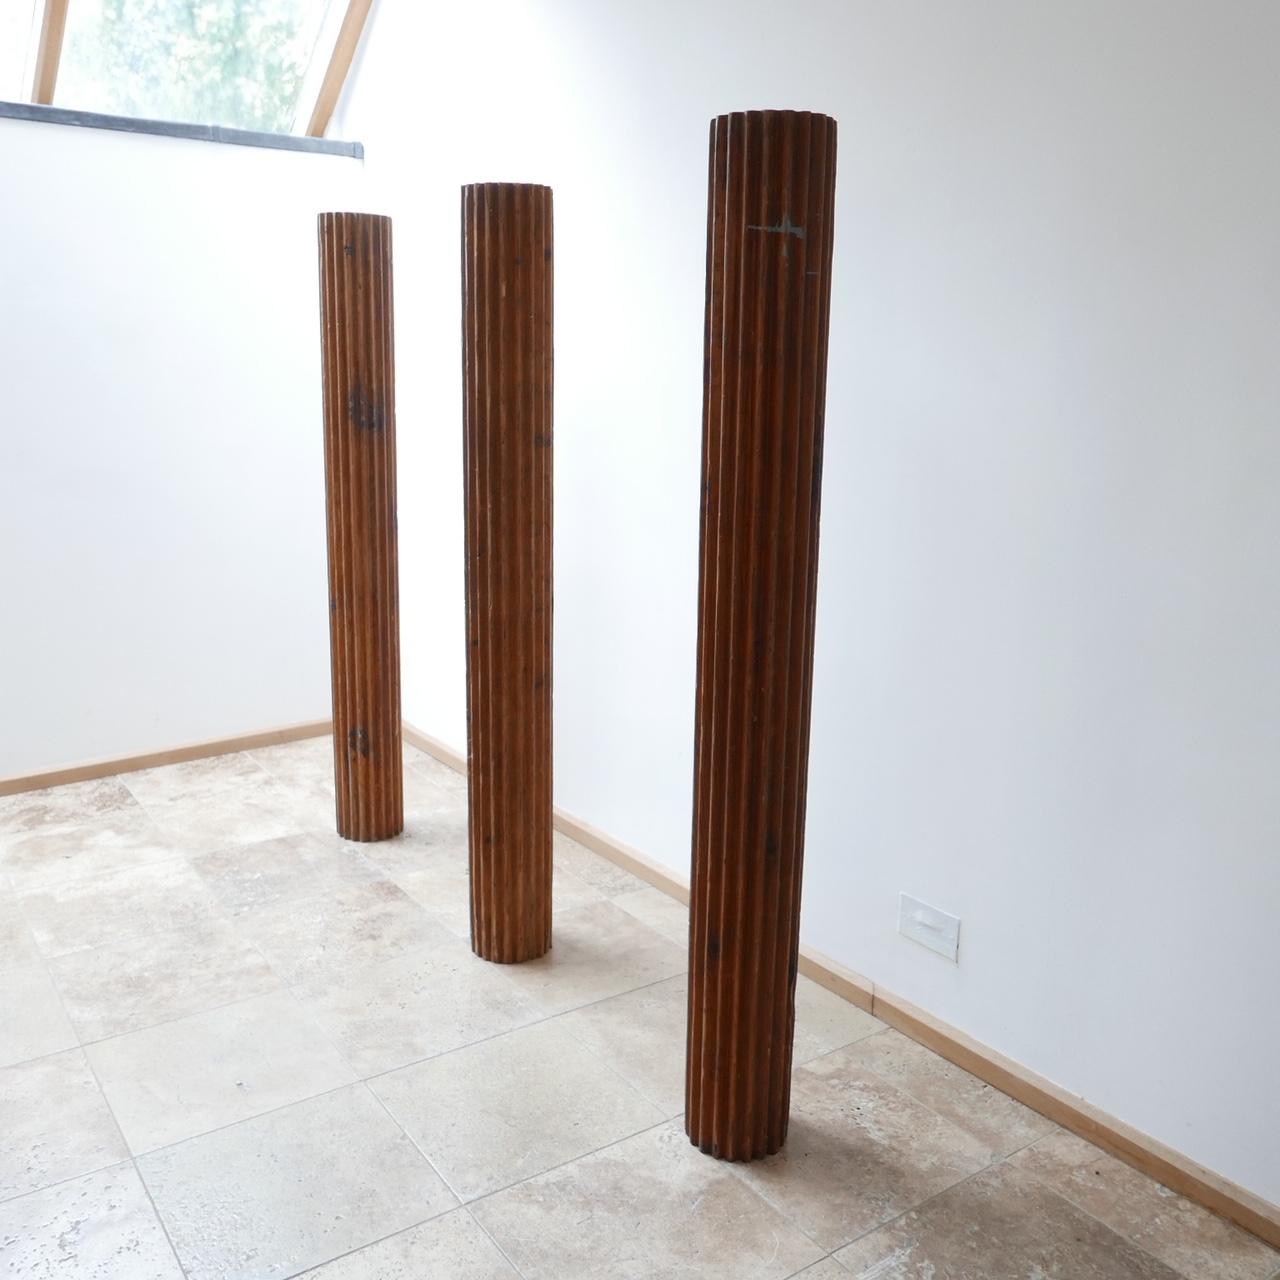 A Trio of Antique French Wooden Columns 1